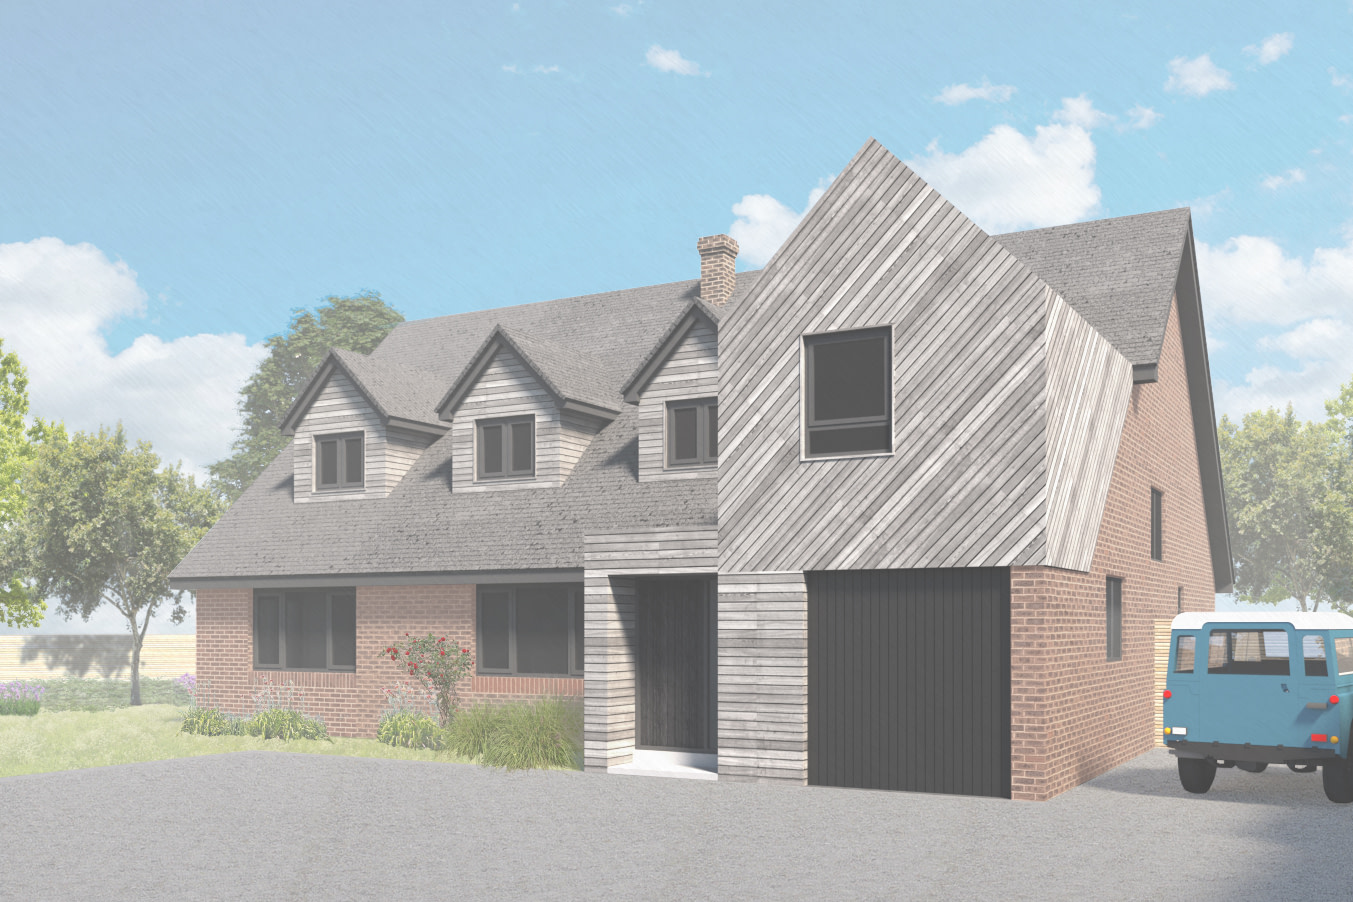 Perspective view showing the front elevation, with timber clad entrance porch and bedroom above